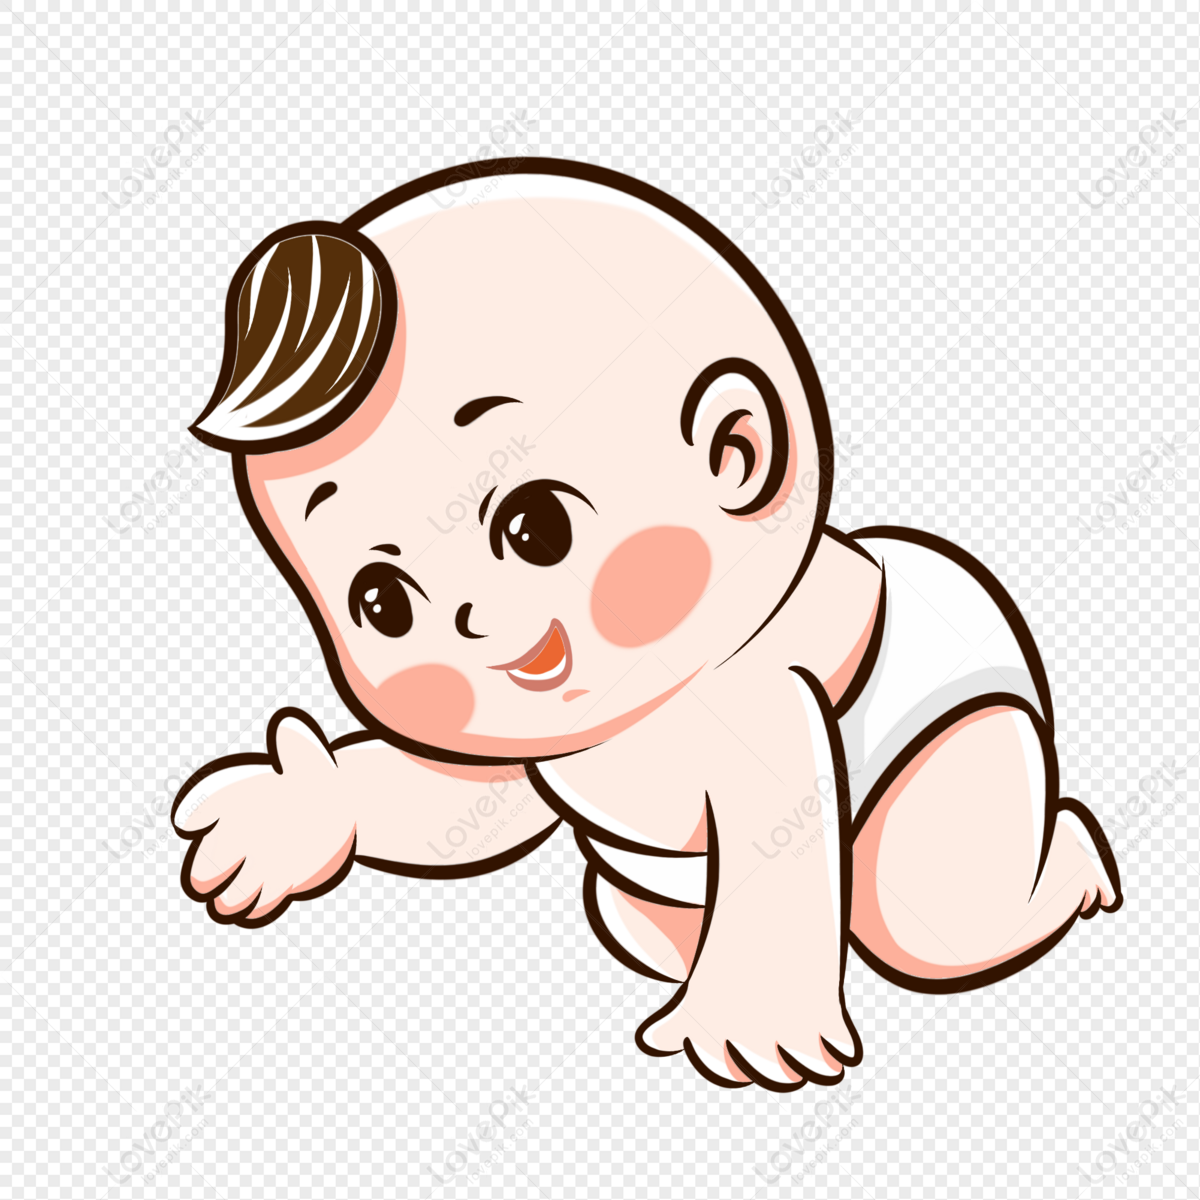 Bebe PNG Images With Transparent Background